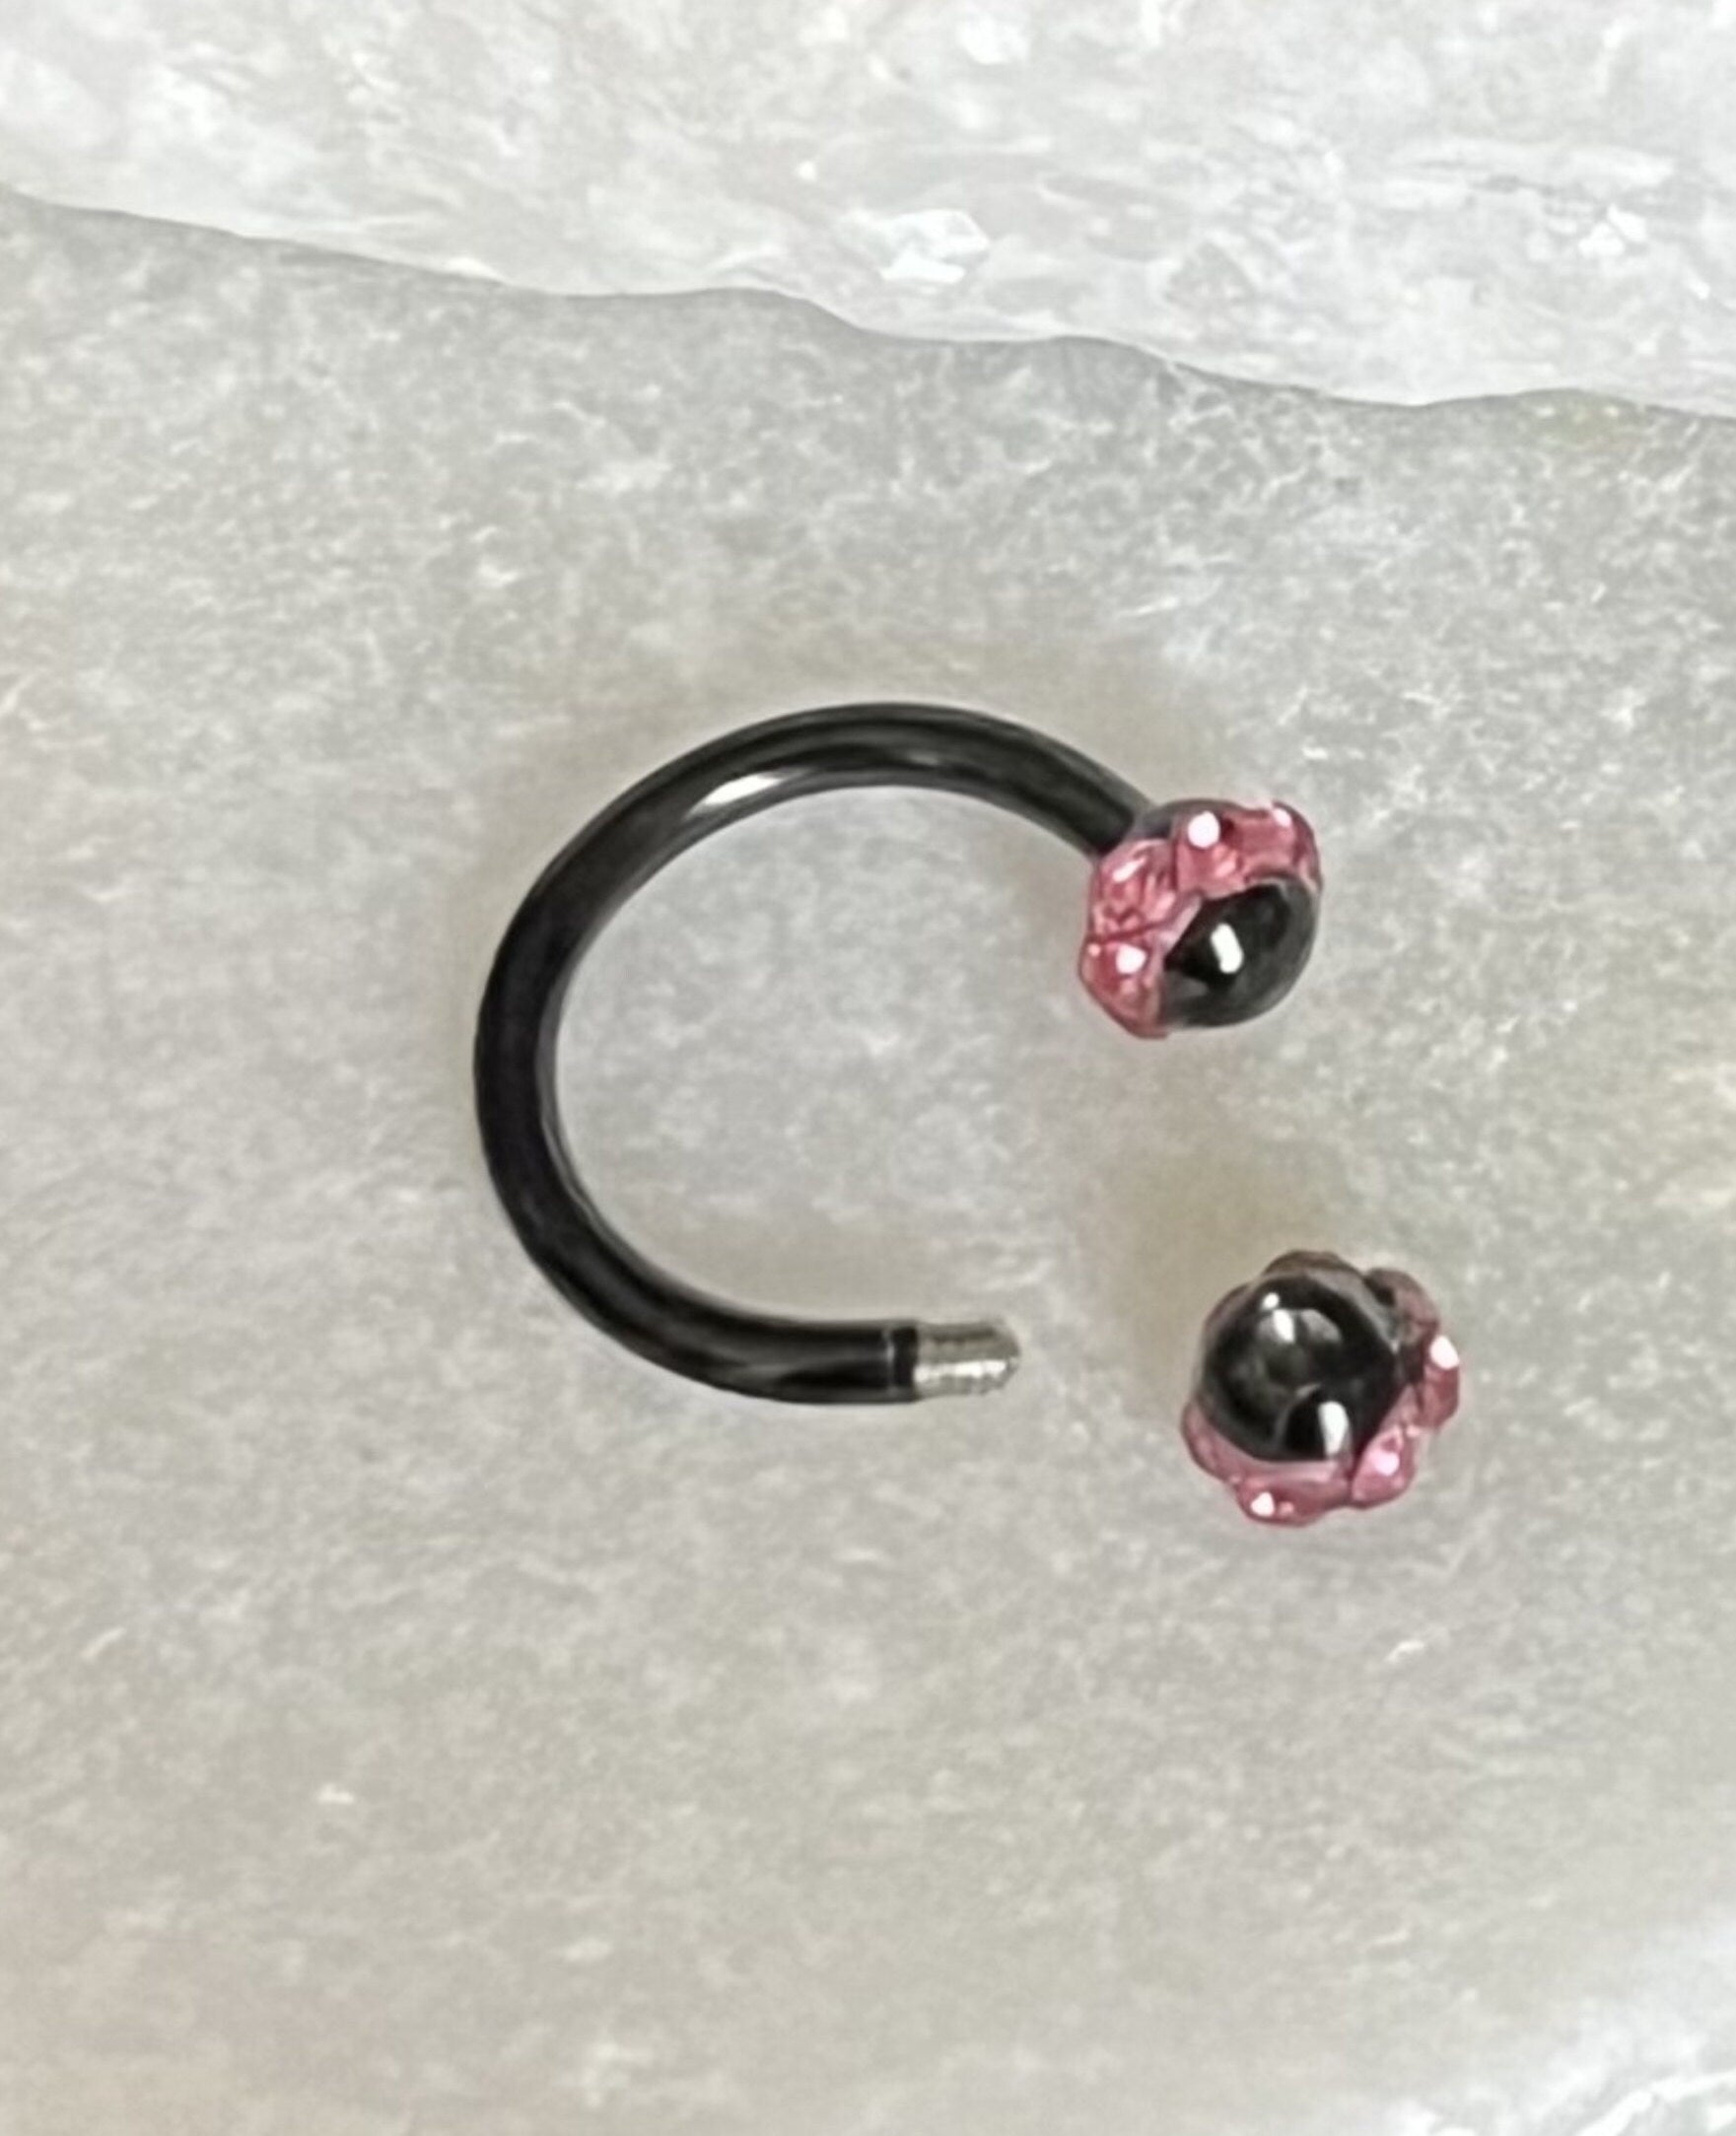 1 Piece Beautiful Crystal Paved Black Circular Horseshoe Septum Ring - 16g, 8mm - Aurora Borealis, Clear, Pink, Aqua or Red Available!